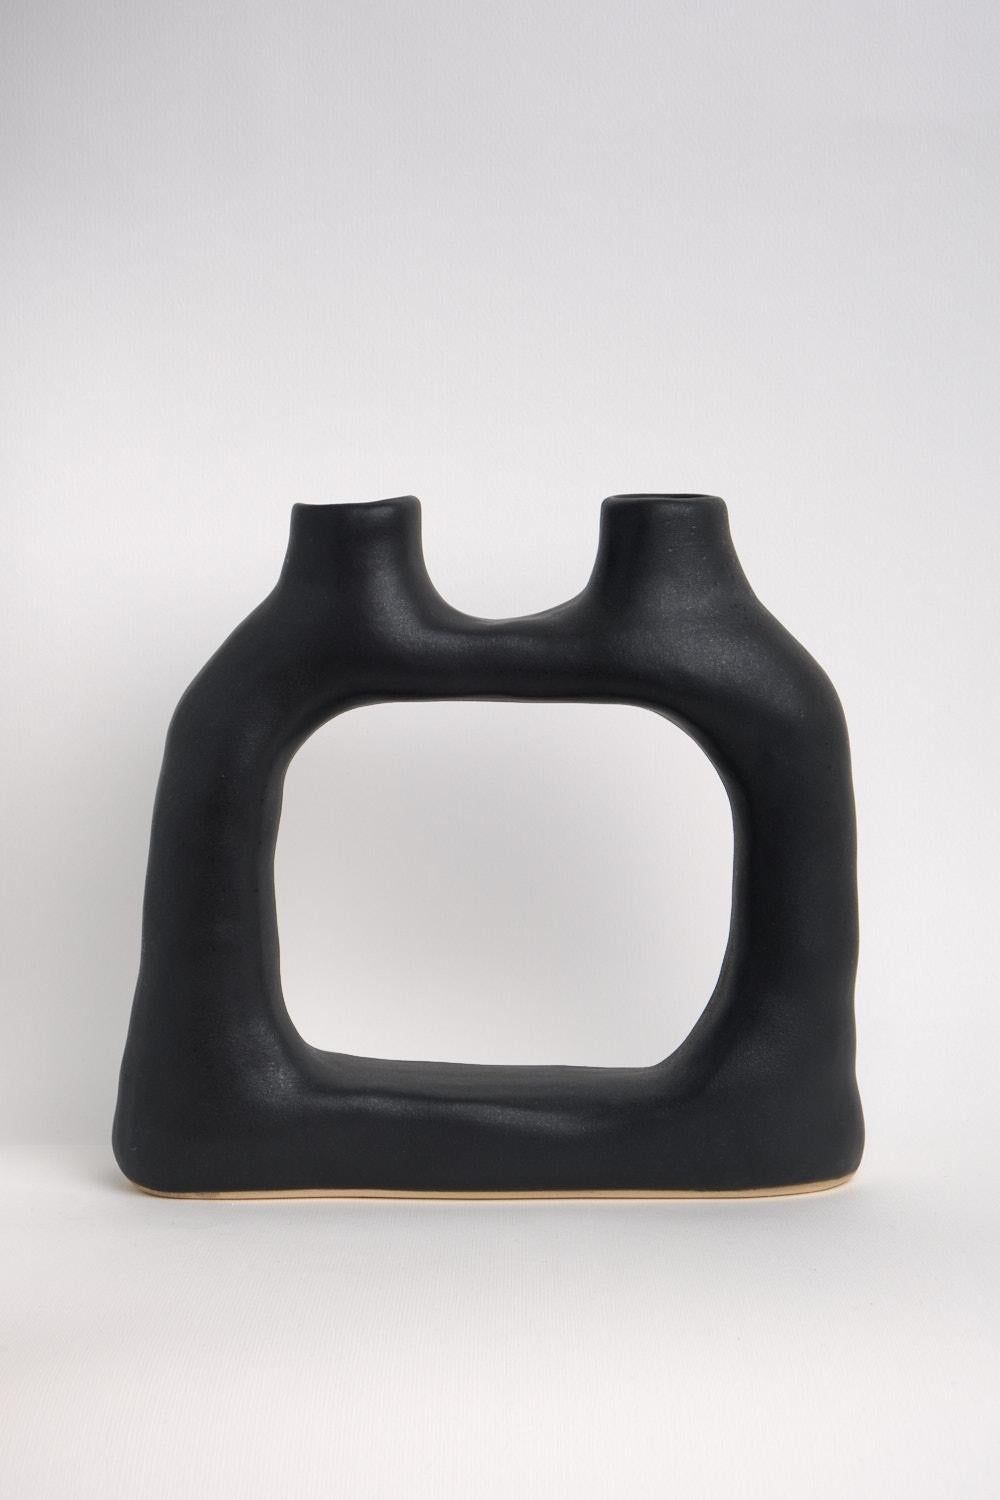 Ceramic sculptural vase from the permanent collection.

Dimensions: 23 x 8 x 19.